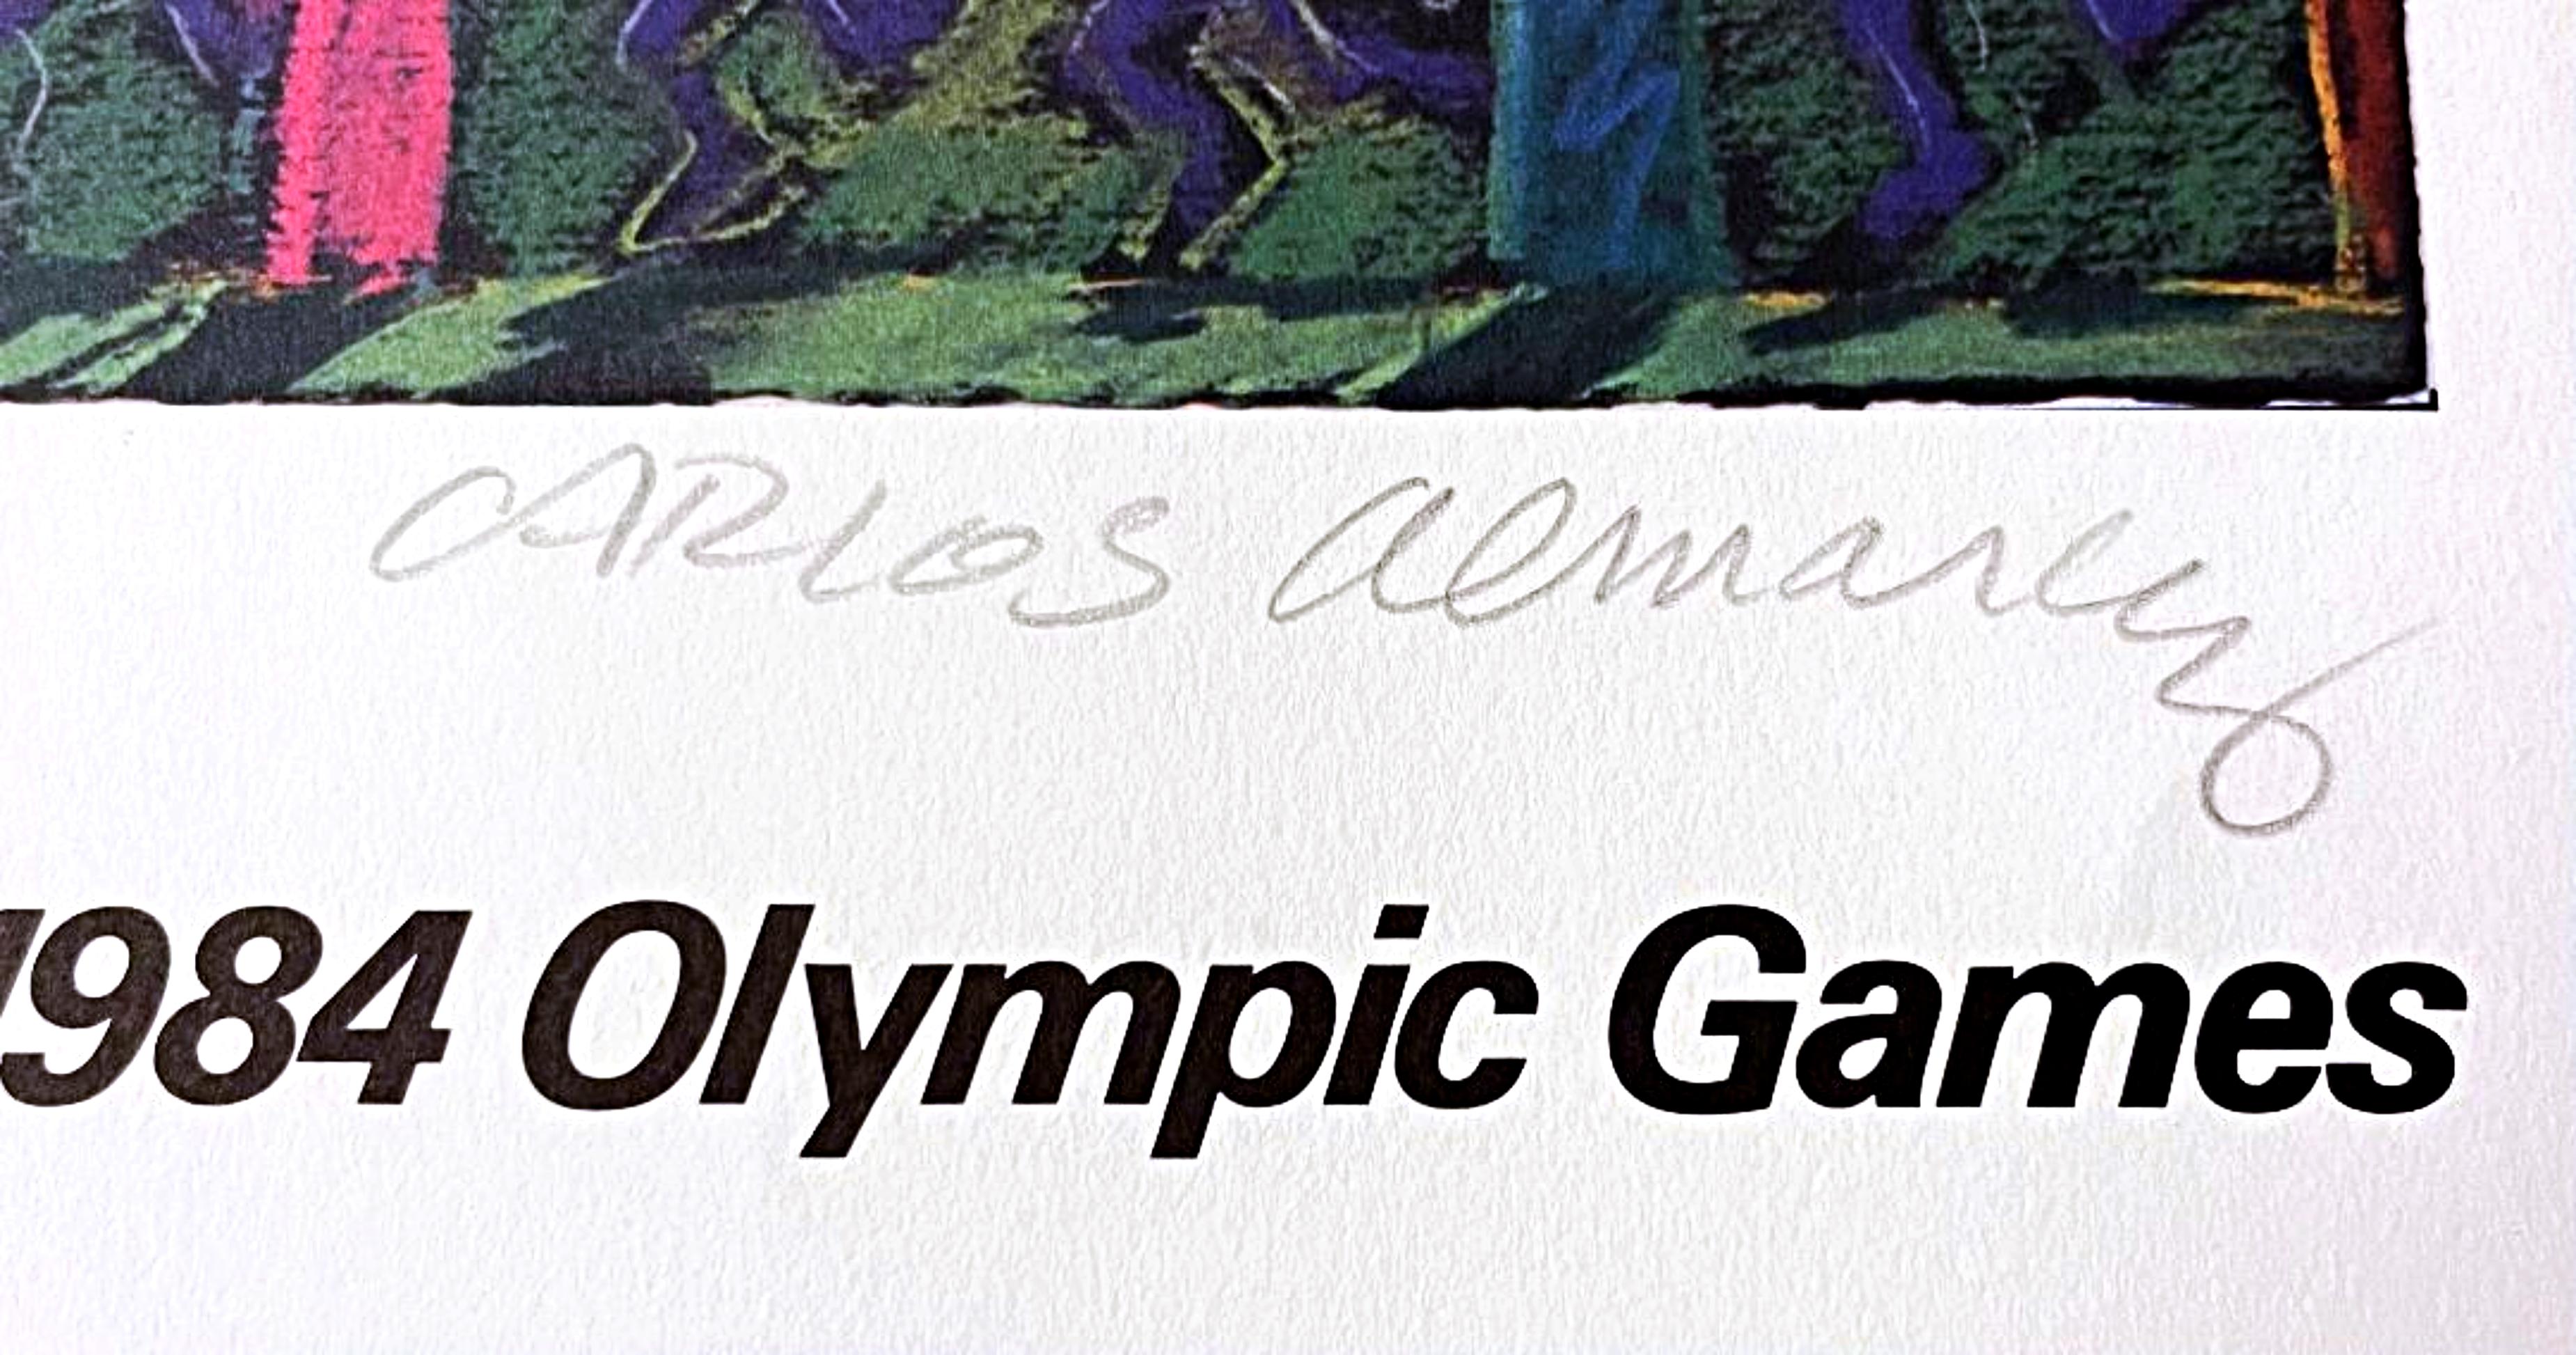 Los Angeles 1984 Olympic Games poster hand signed Edition 750 w/Olympic COA  - Contemporary Print by Carlos Almaraz